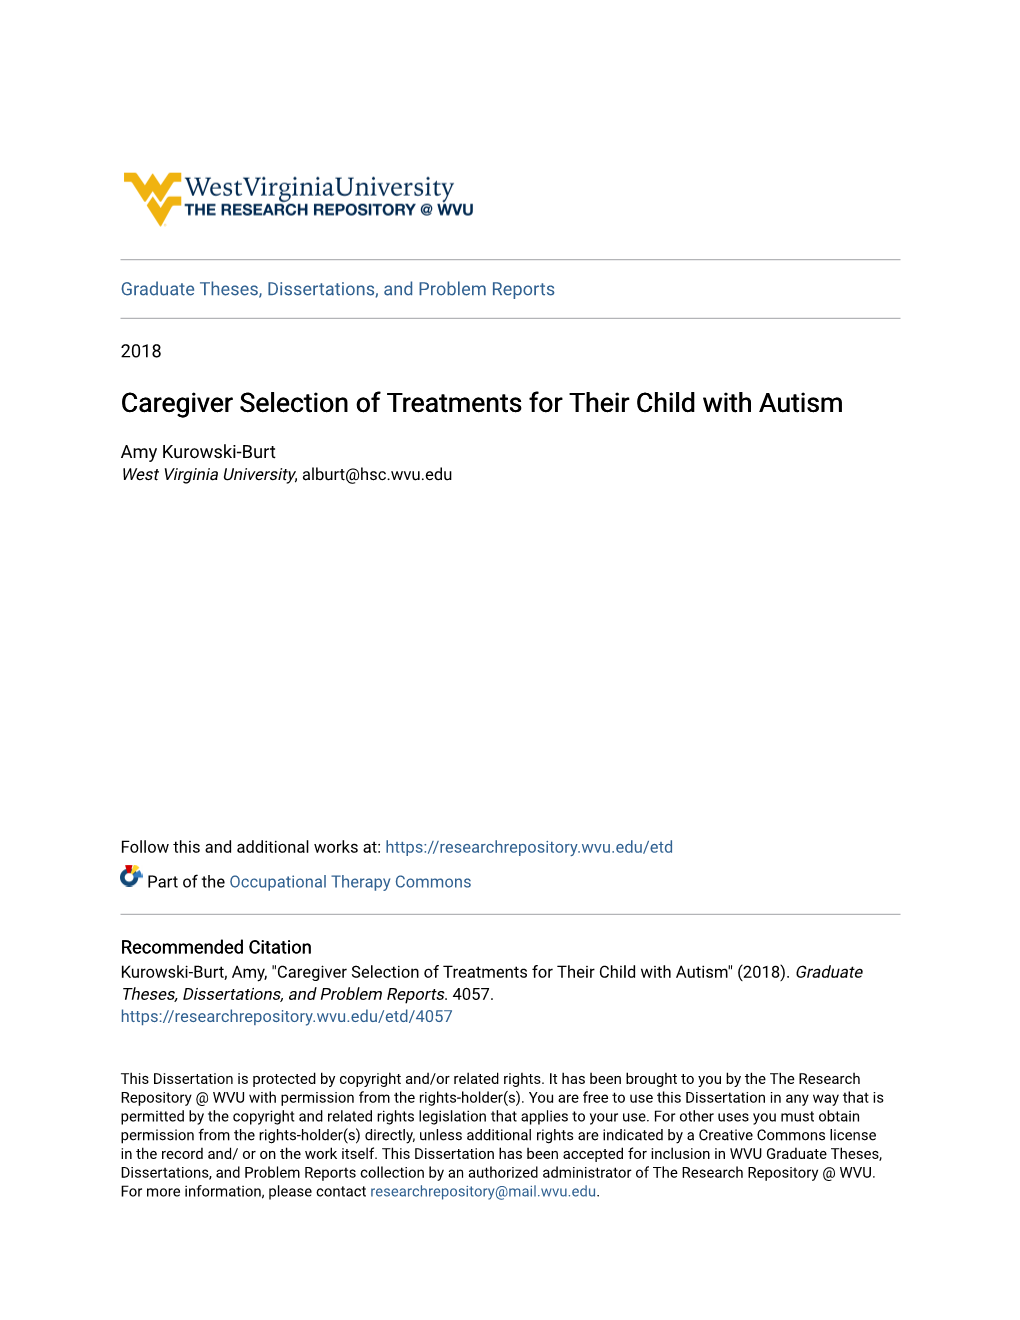 Caregiver Selection of Treatments for Their Child with Autism